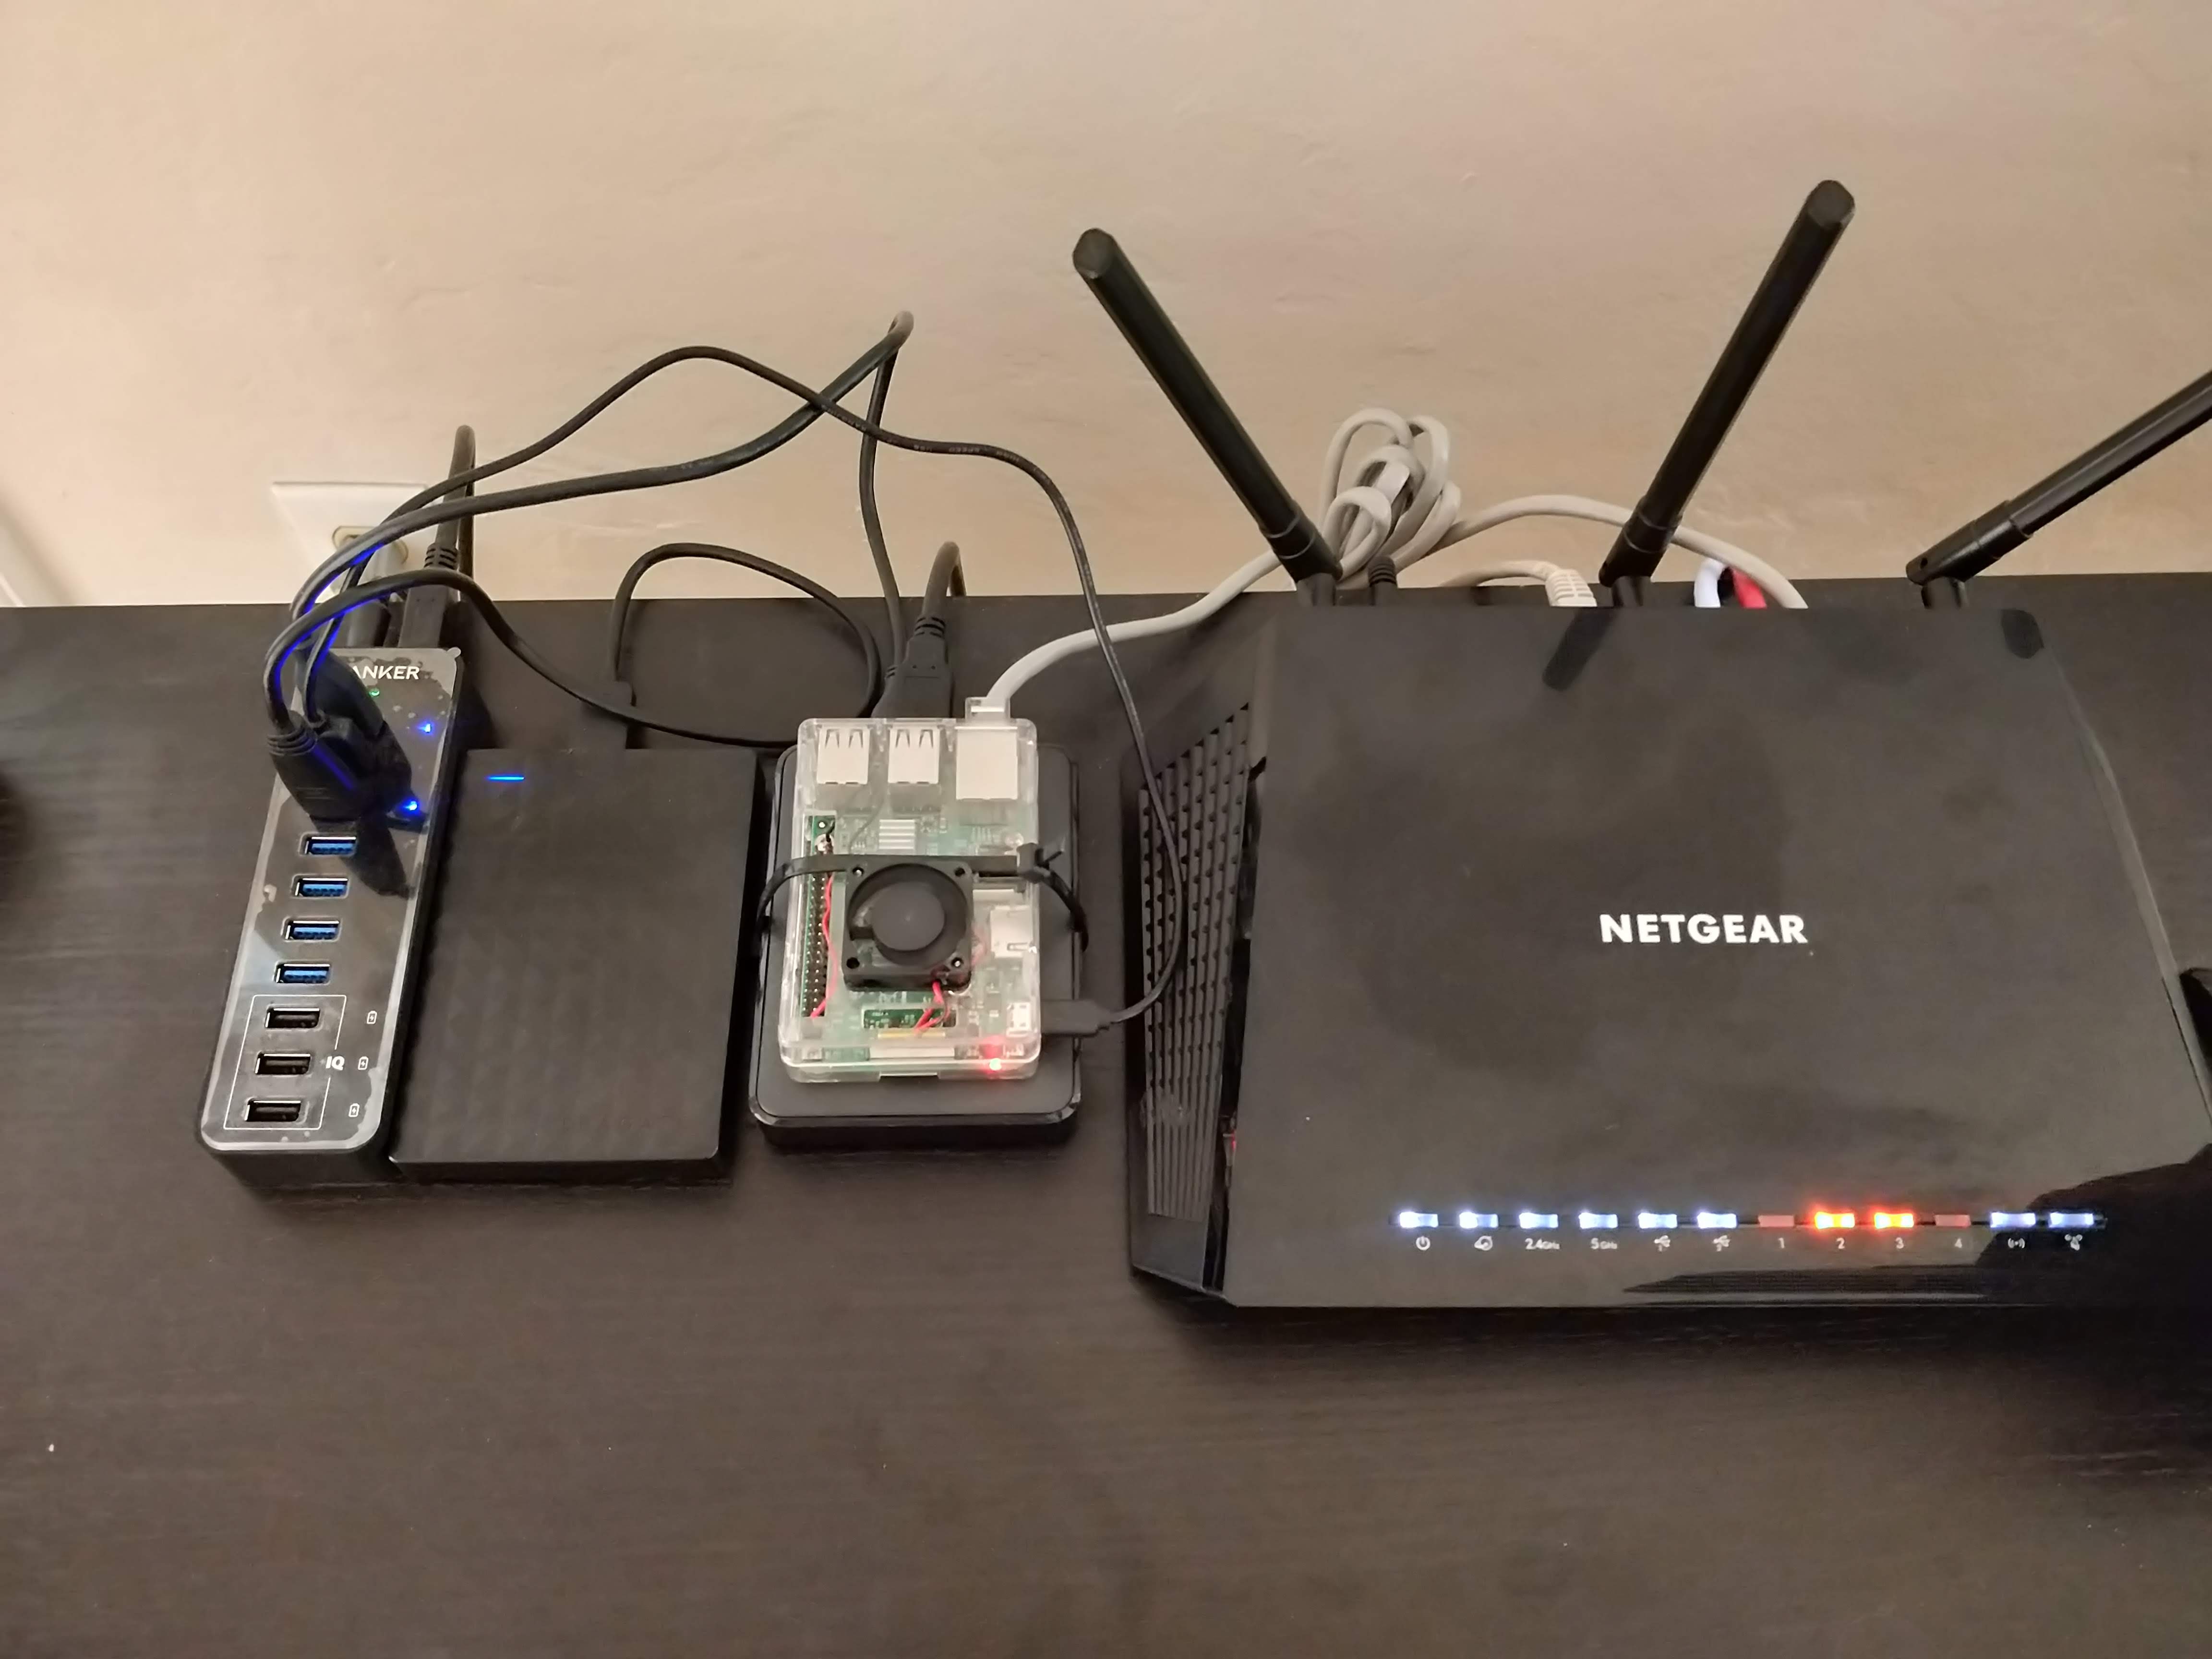 Raspberry Pi connected to Netgear Router and to USB drives.